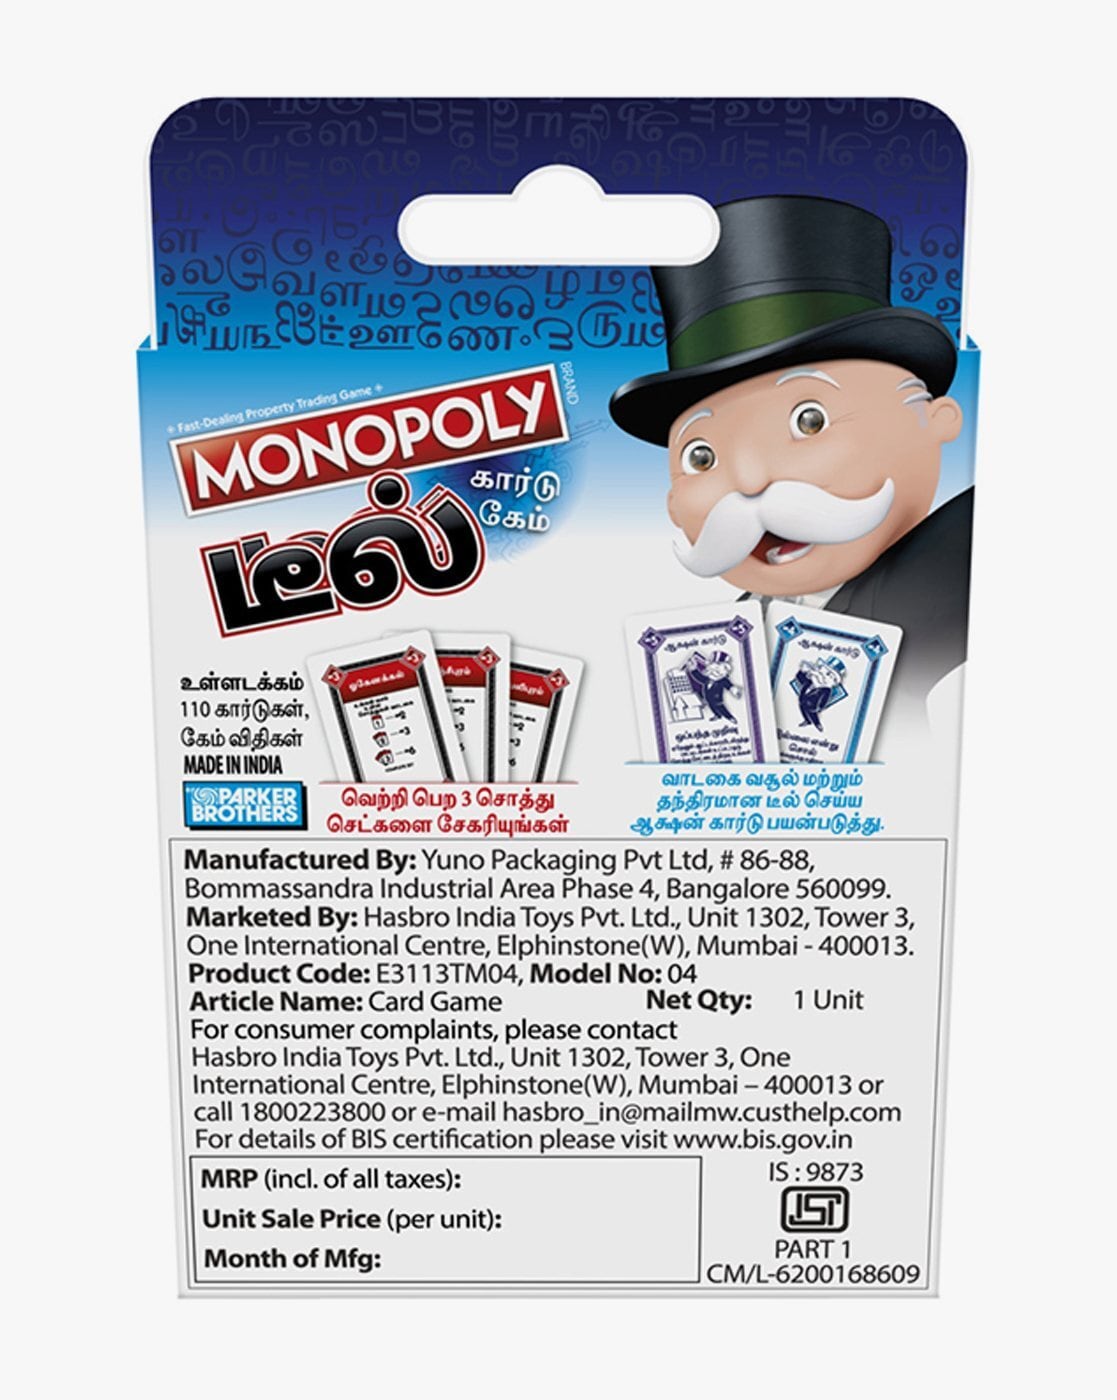 Monopoly Deal is the only Monopoly worth playing